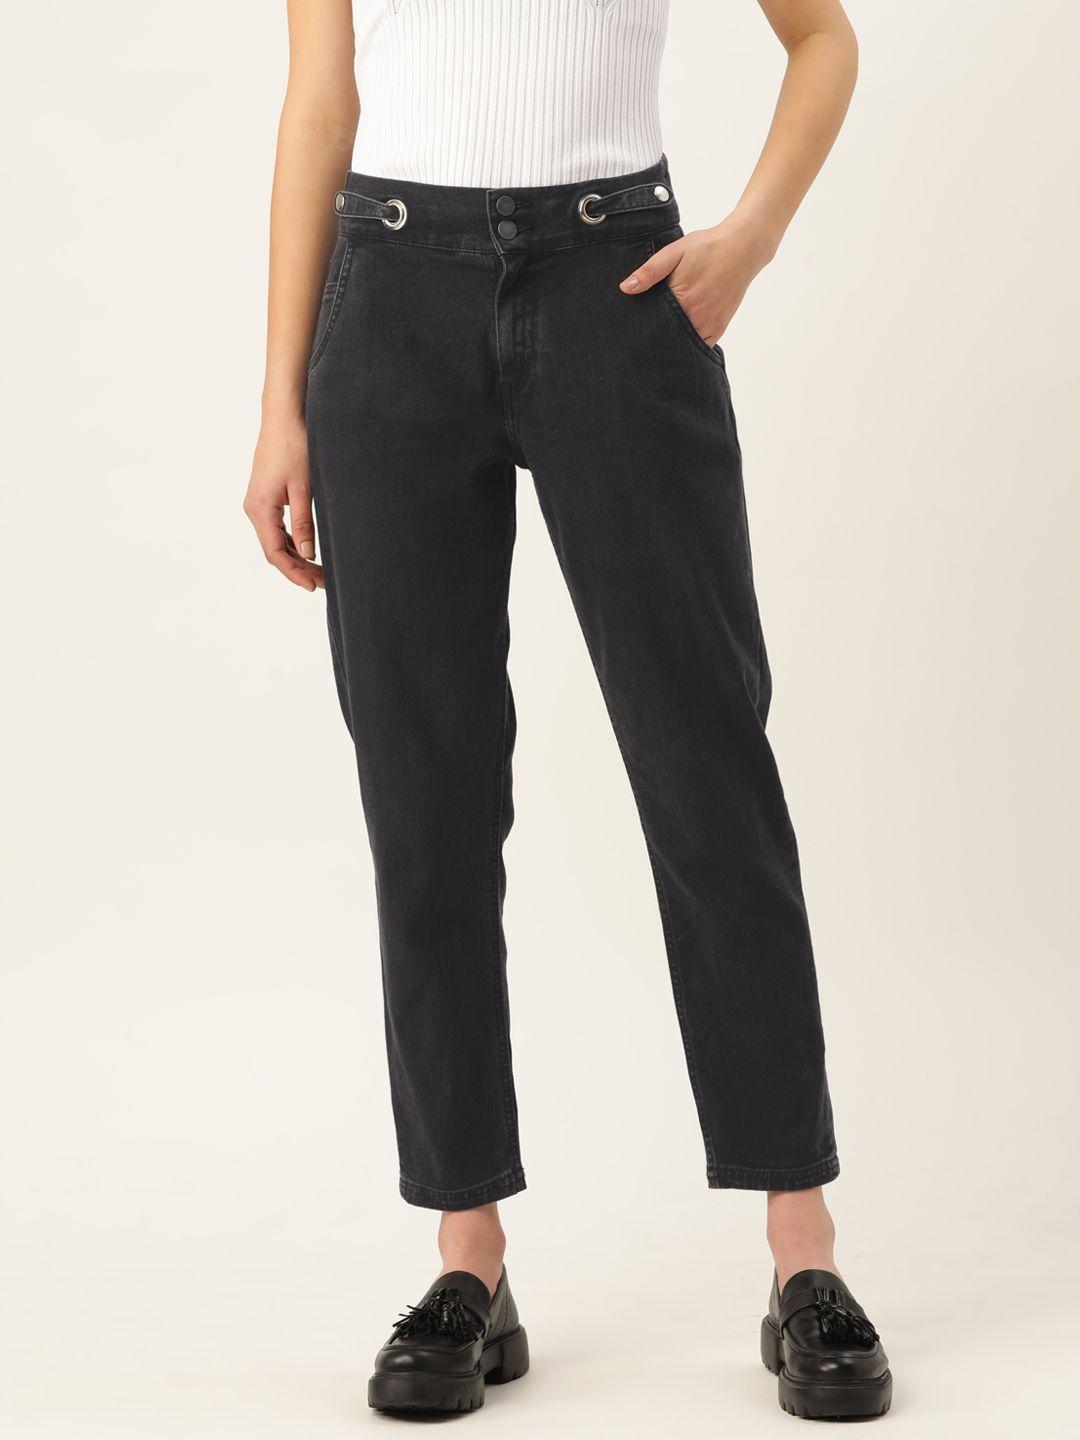 dressberry-women-high-rise-mom-fit-cropped-jeans